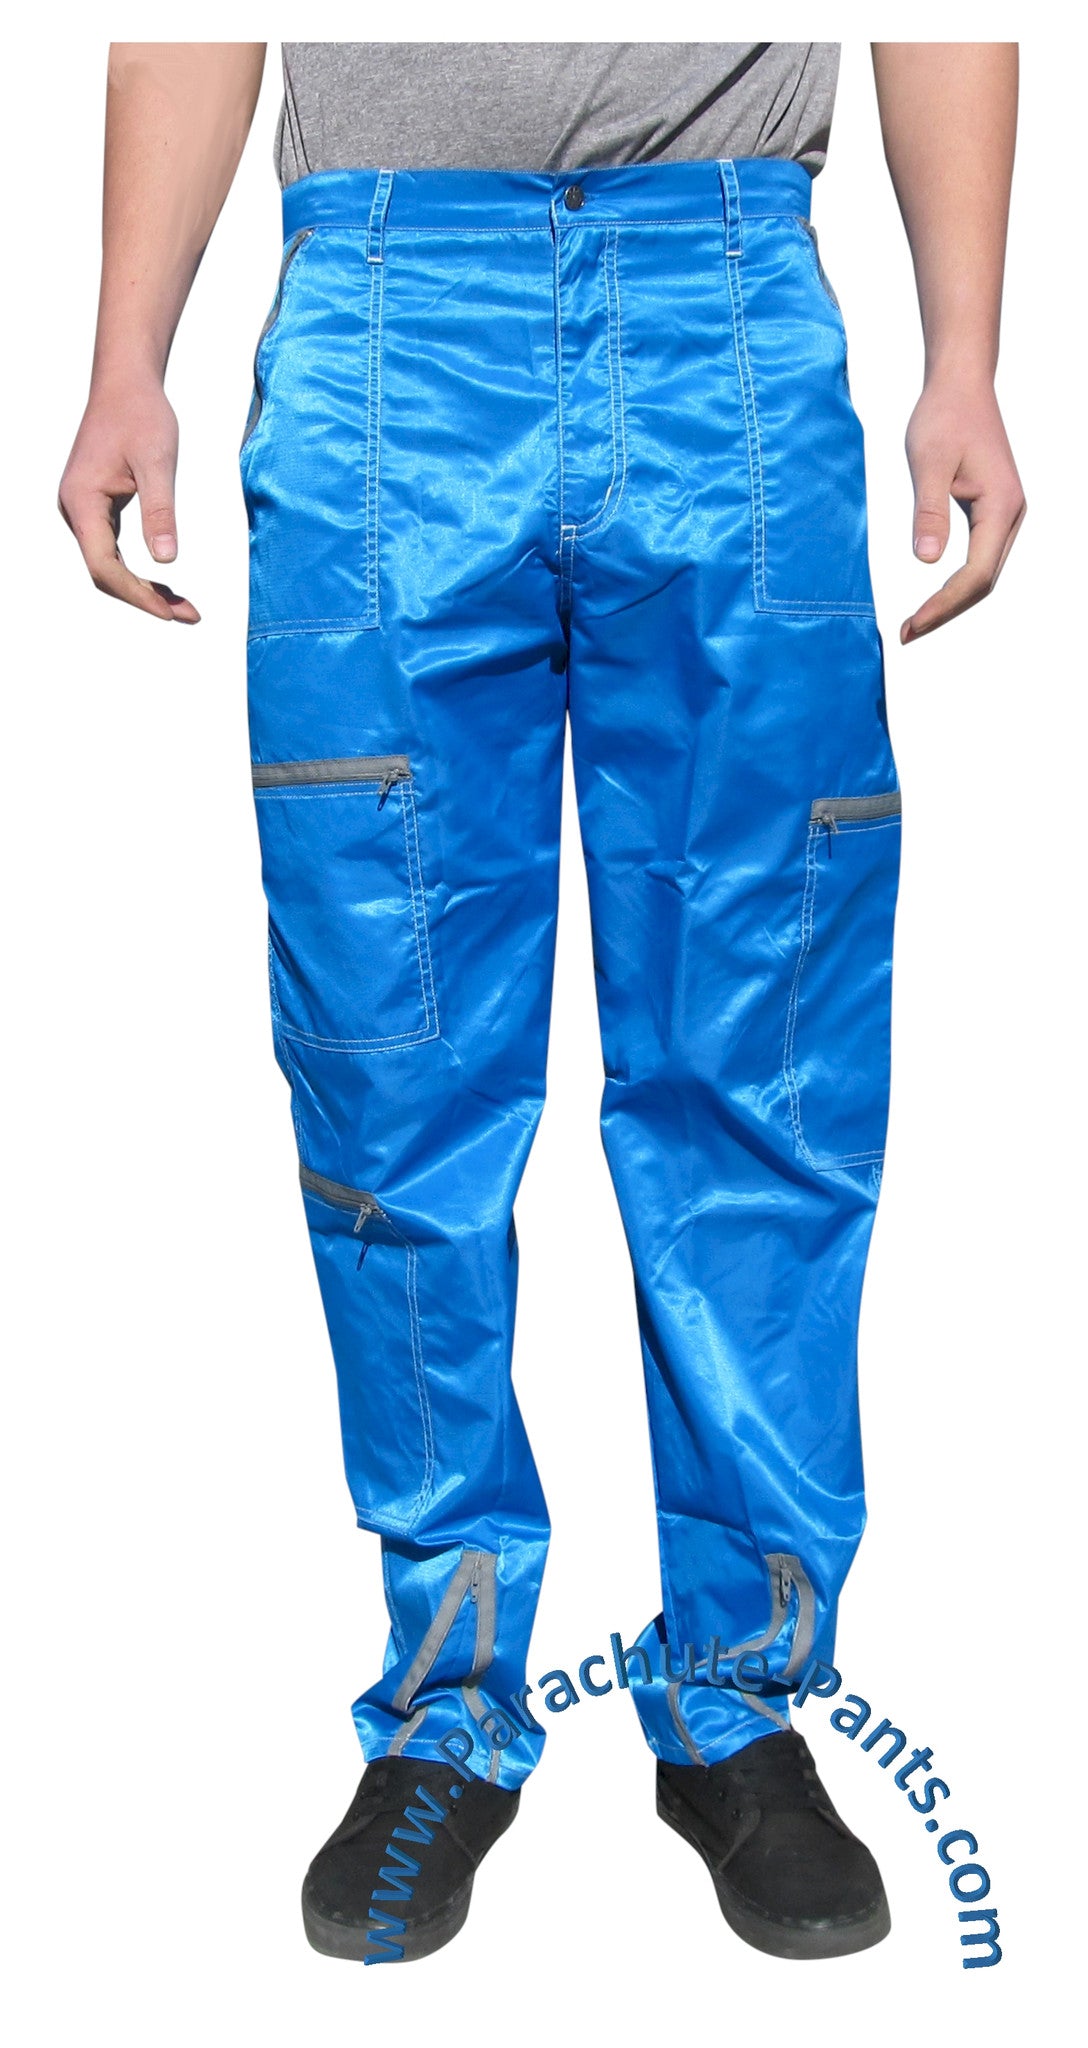 Panno D'Or Blue Nylon Parachute Pants with Grey Zippers | The Parachute ...